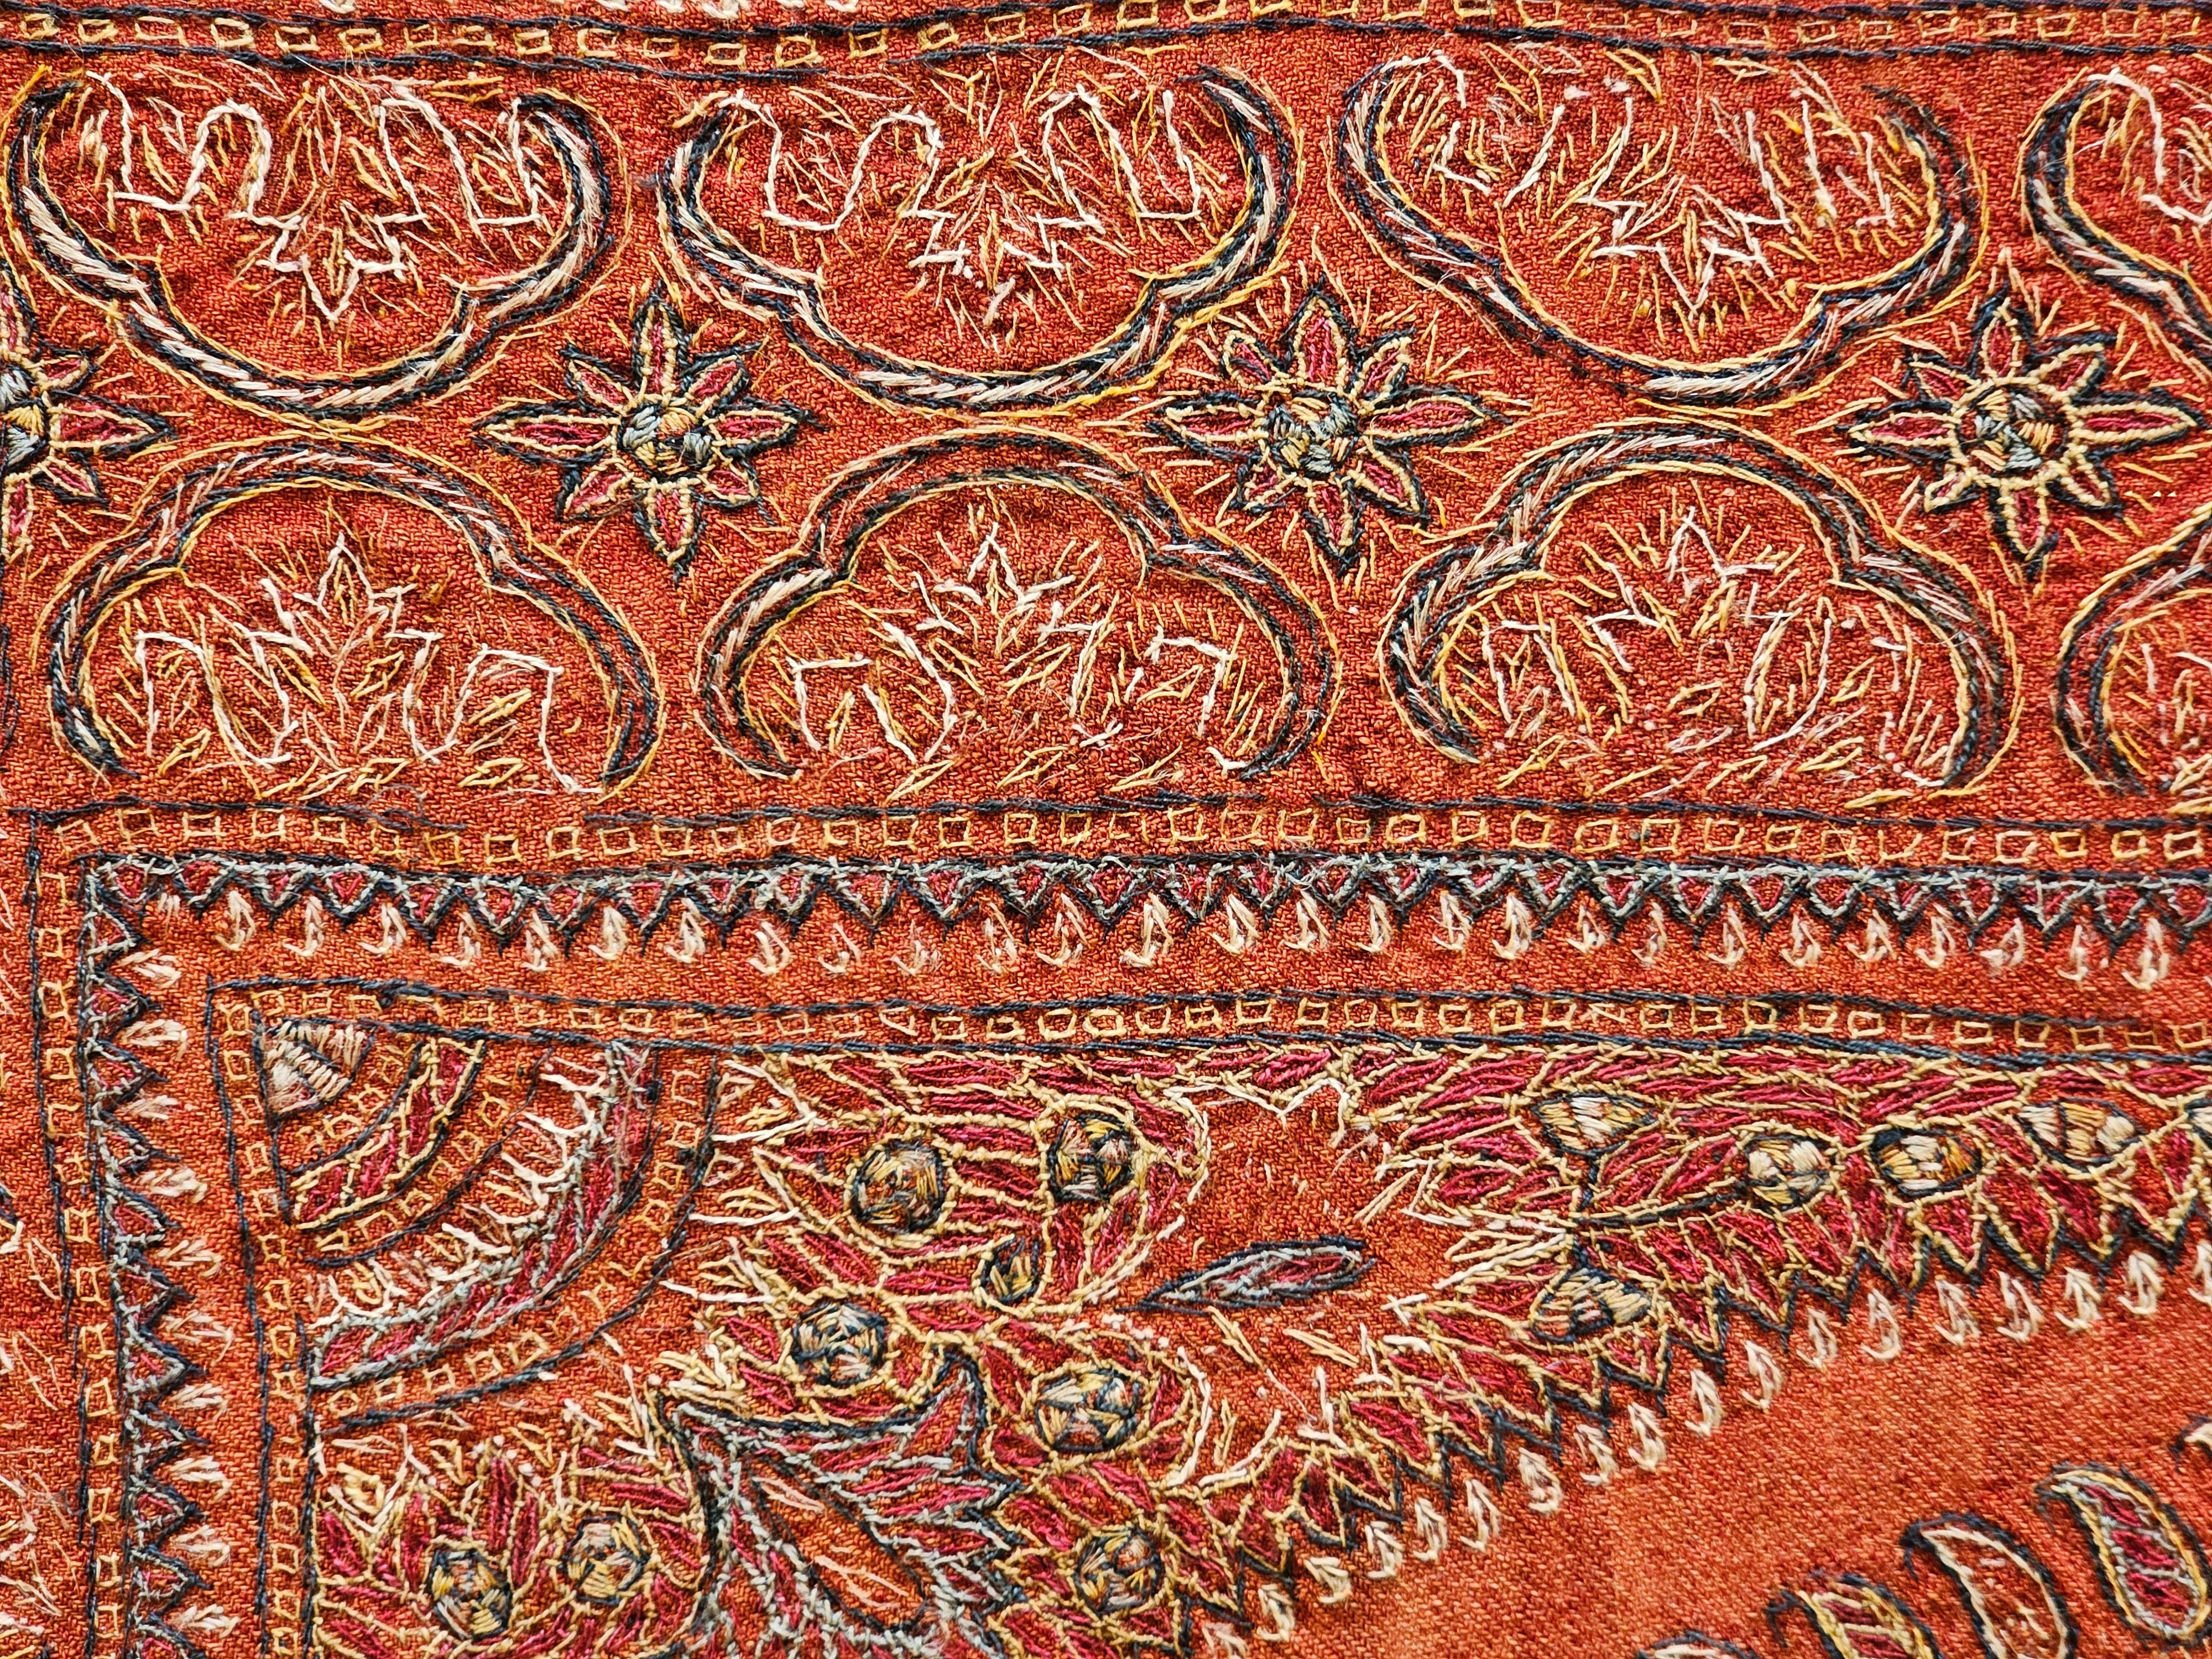 19th Century Persian Kerman Termeh Silk Embroidery Suzani in Red, Blue, Ivory For Sale 5